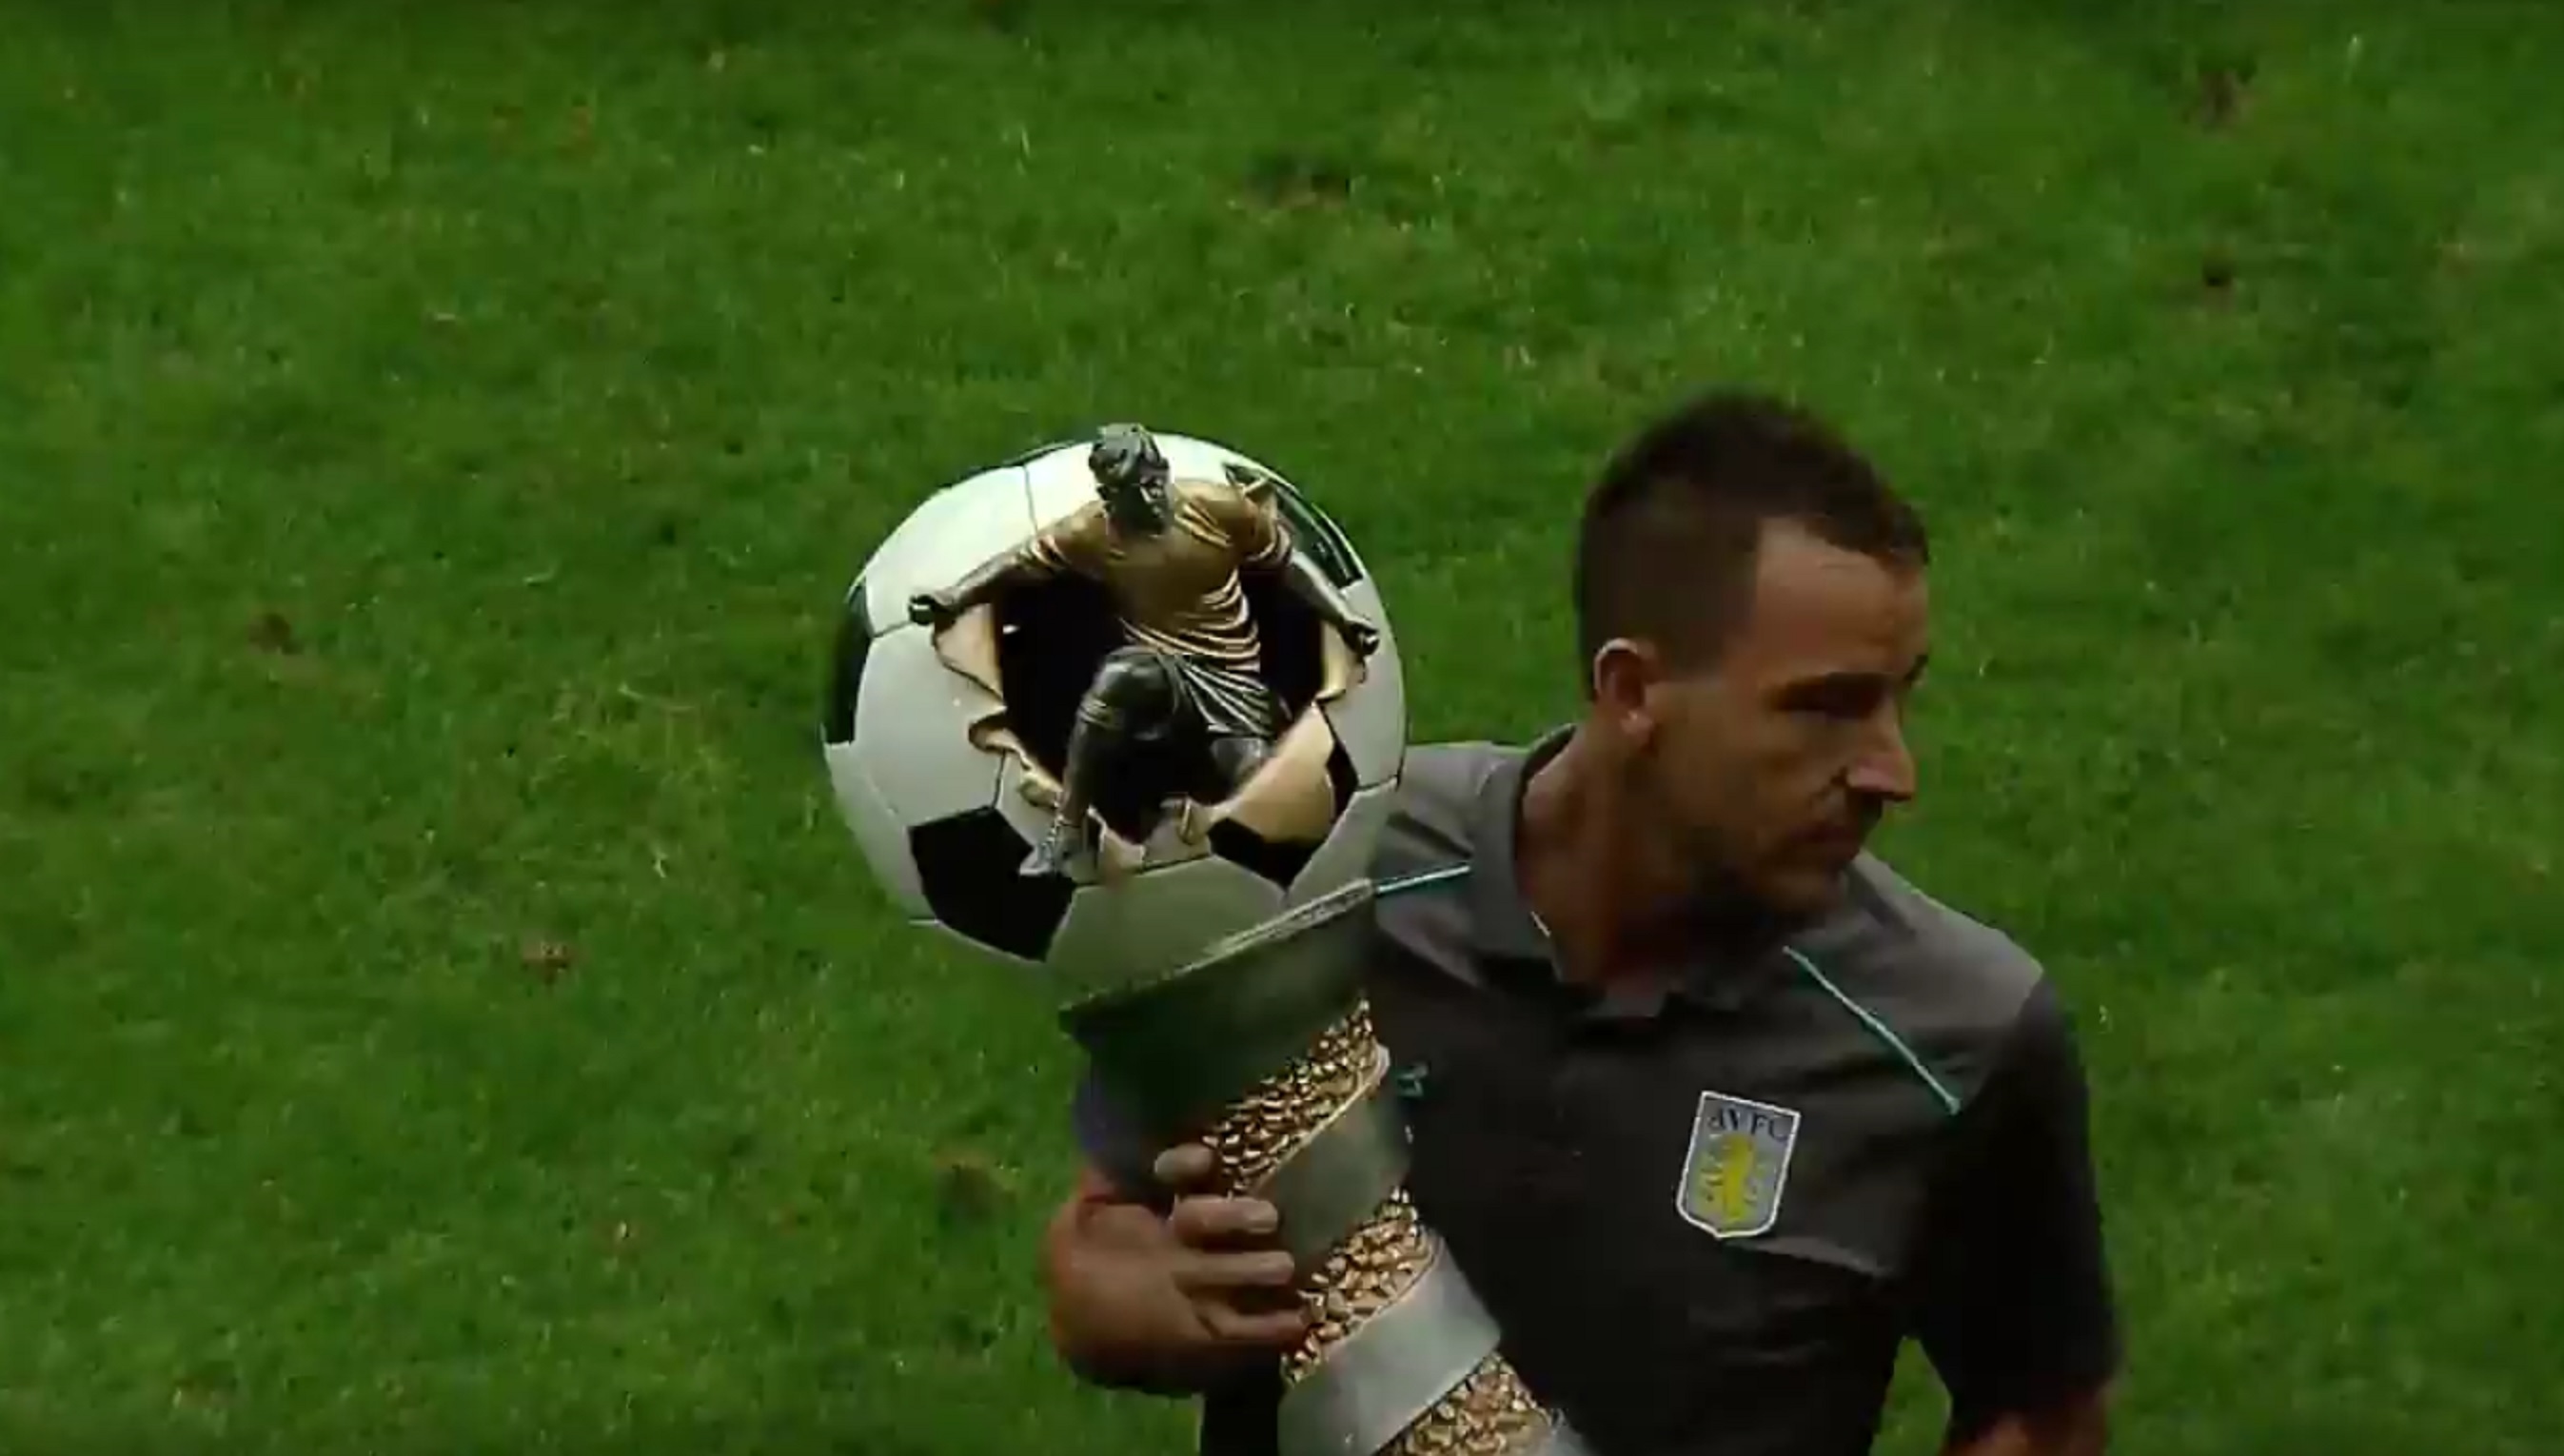 Aston Villa footballers celebrate winning the Cup of Traditions